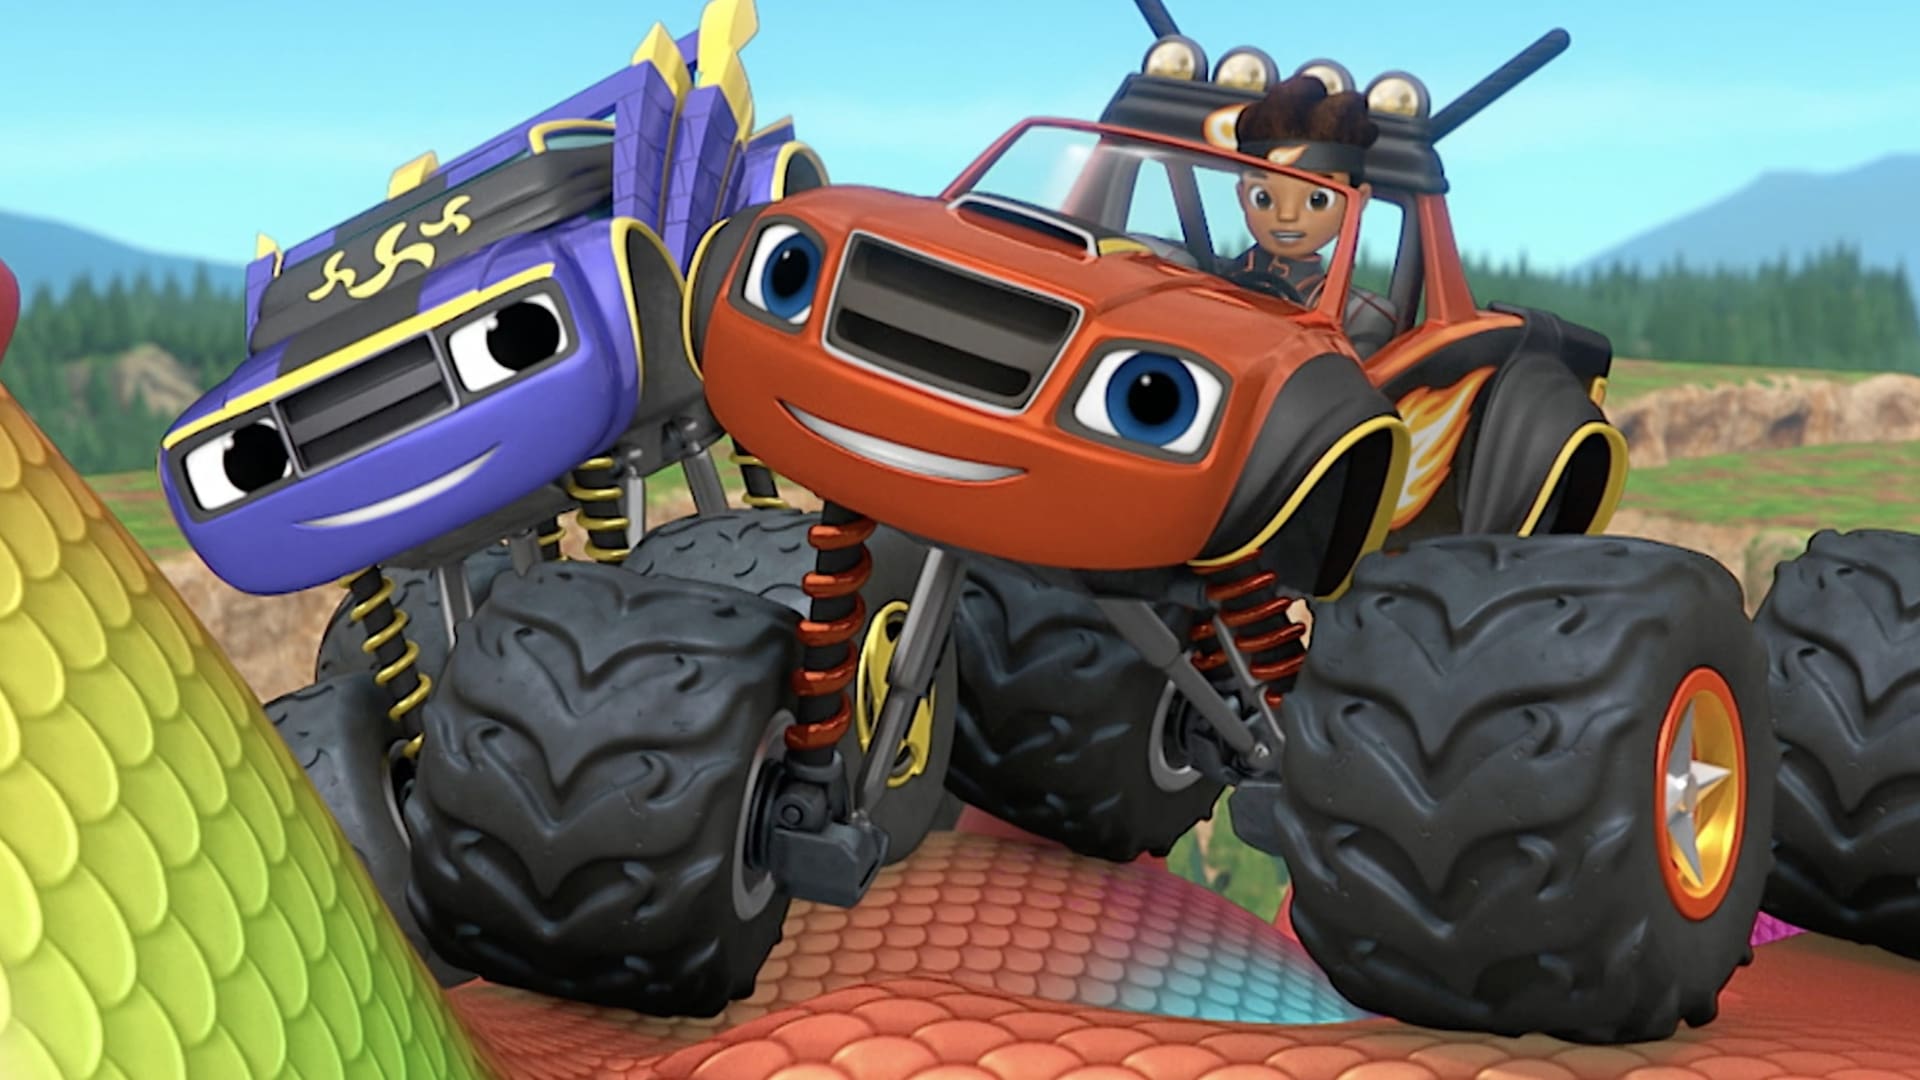 blaze and the monster machines, 2014. 